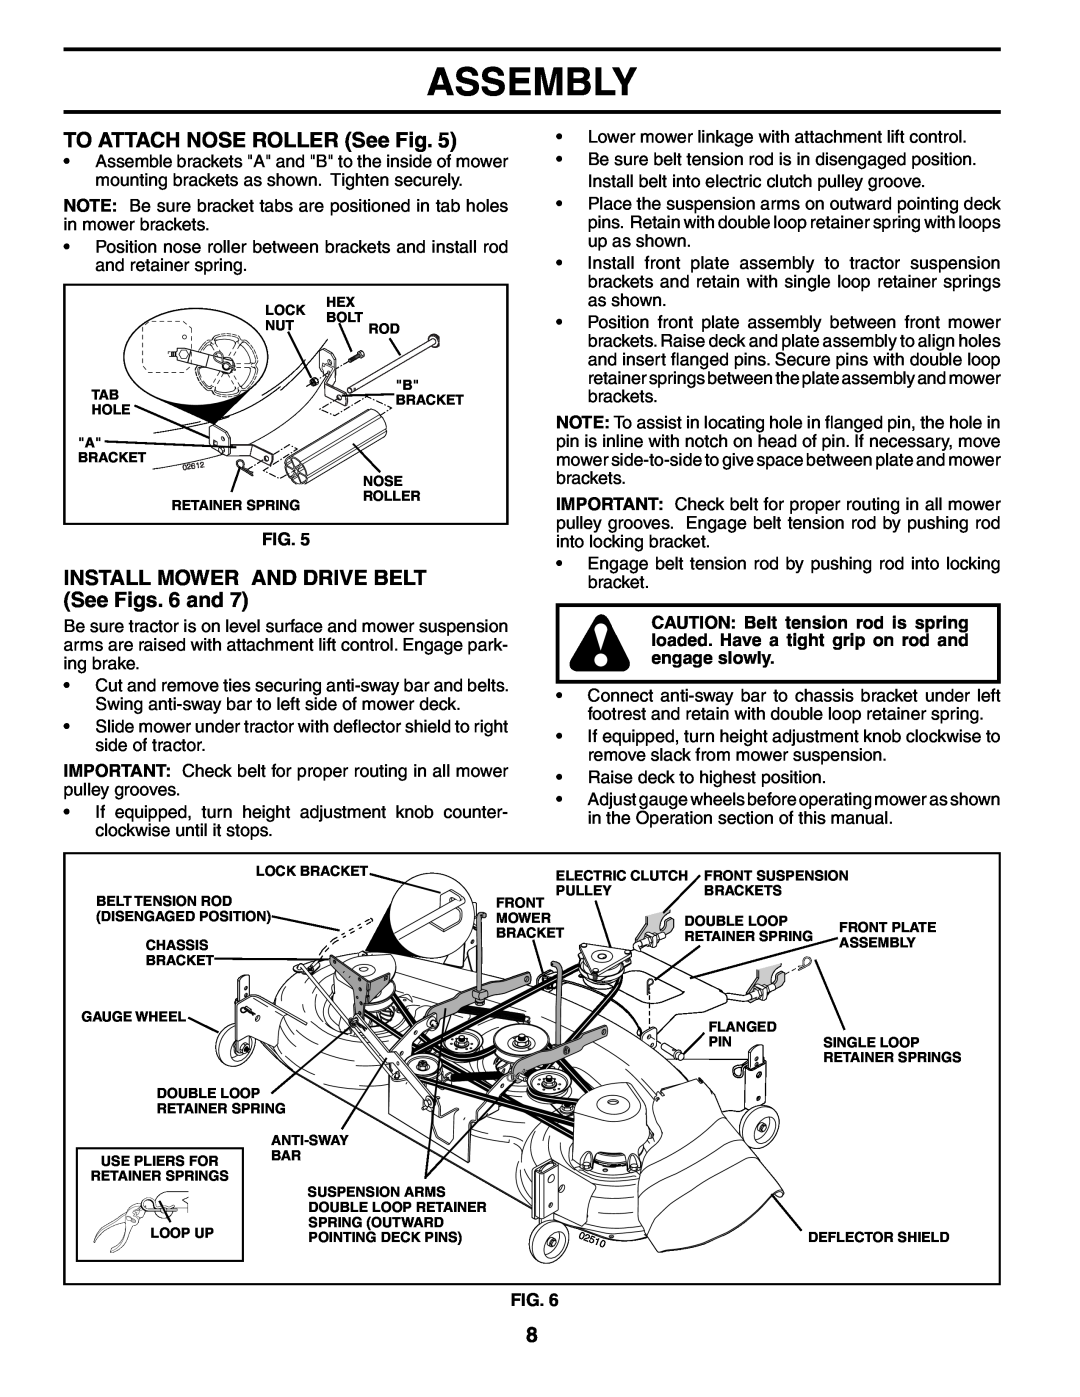 Poulan PD20PH48STB owner manual TO ATTACH NOSE ROLLER See Fig, INSTALL MOWER AND DRIVE BELT See Figs. 6 and, Assembly 